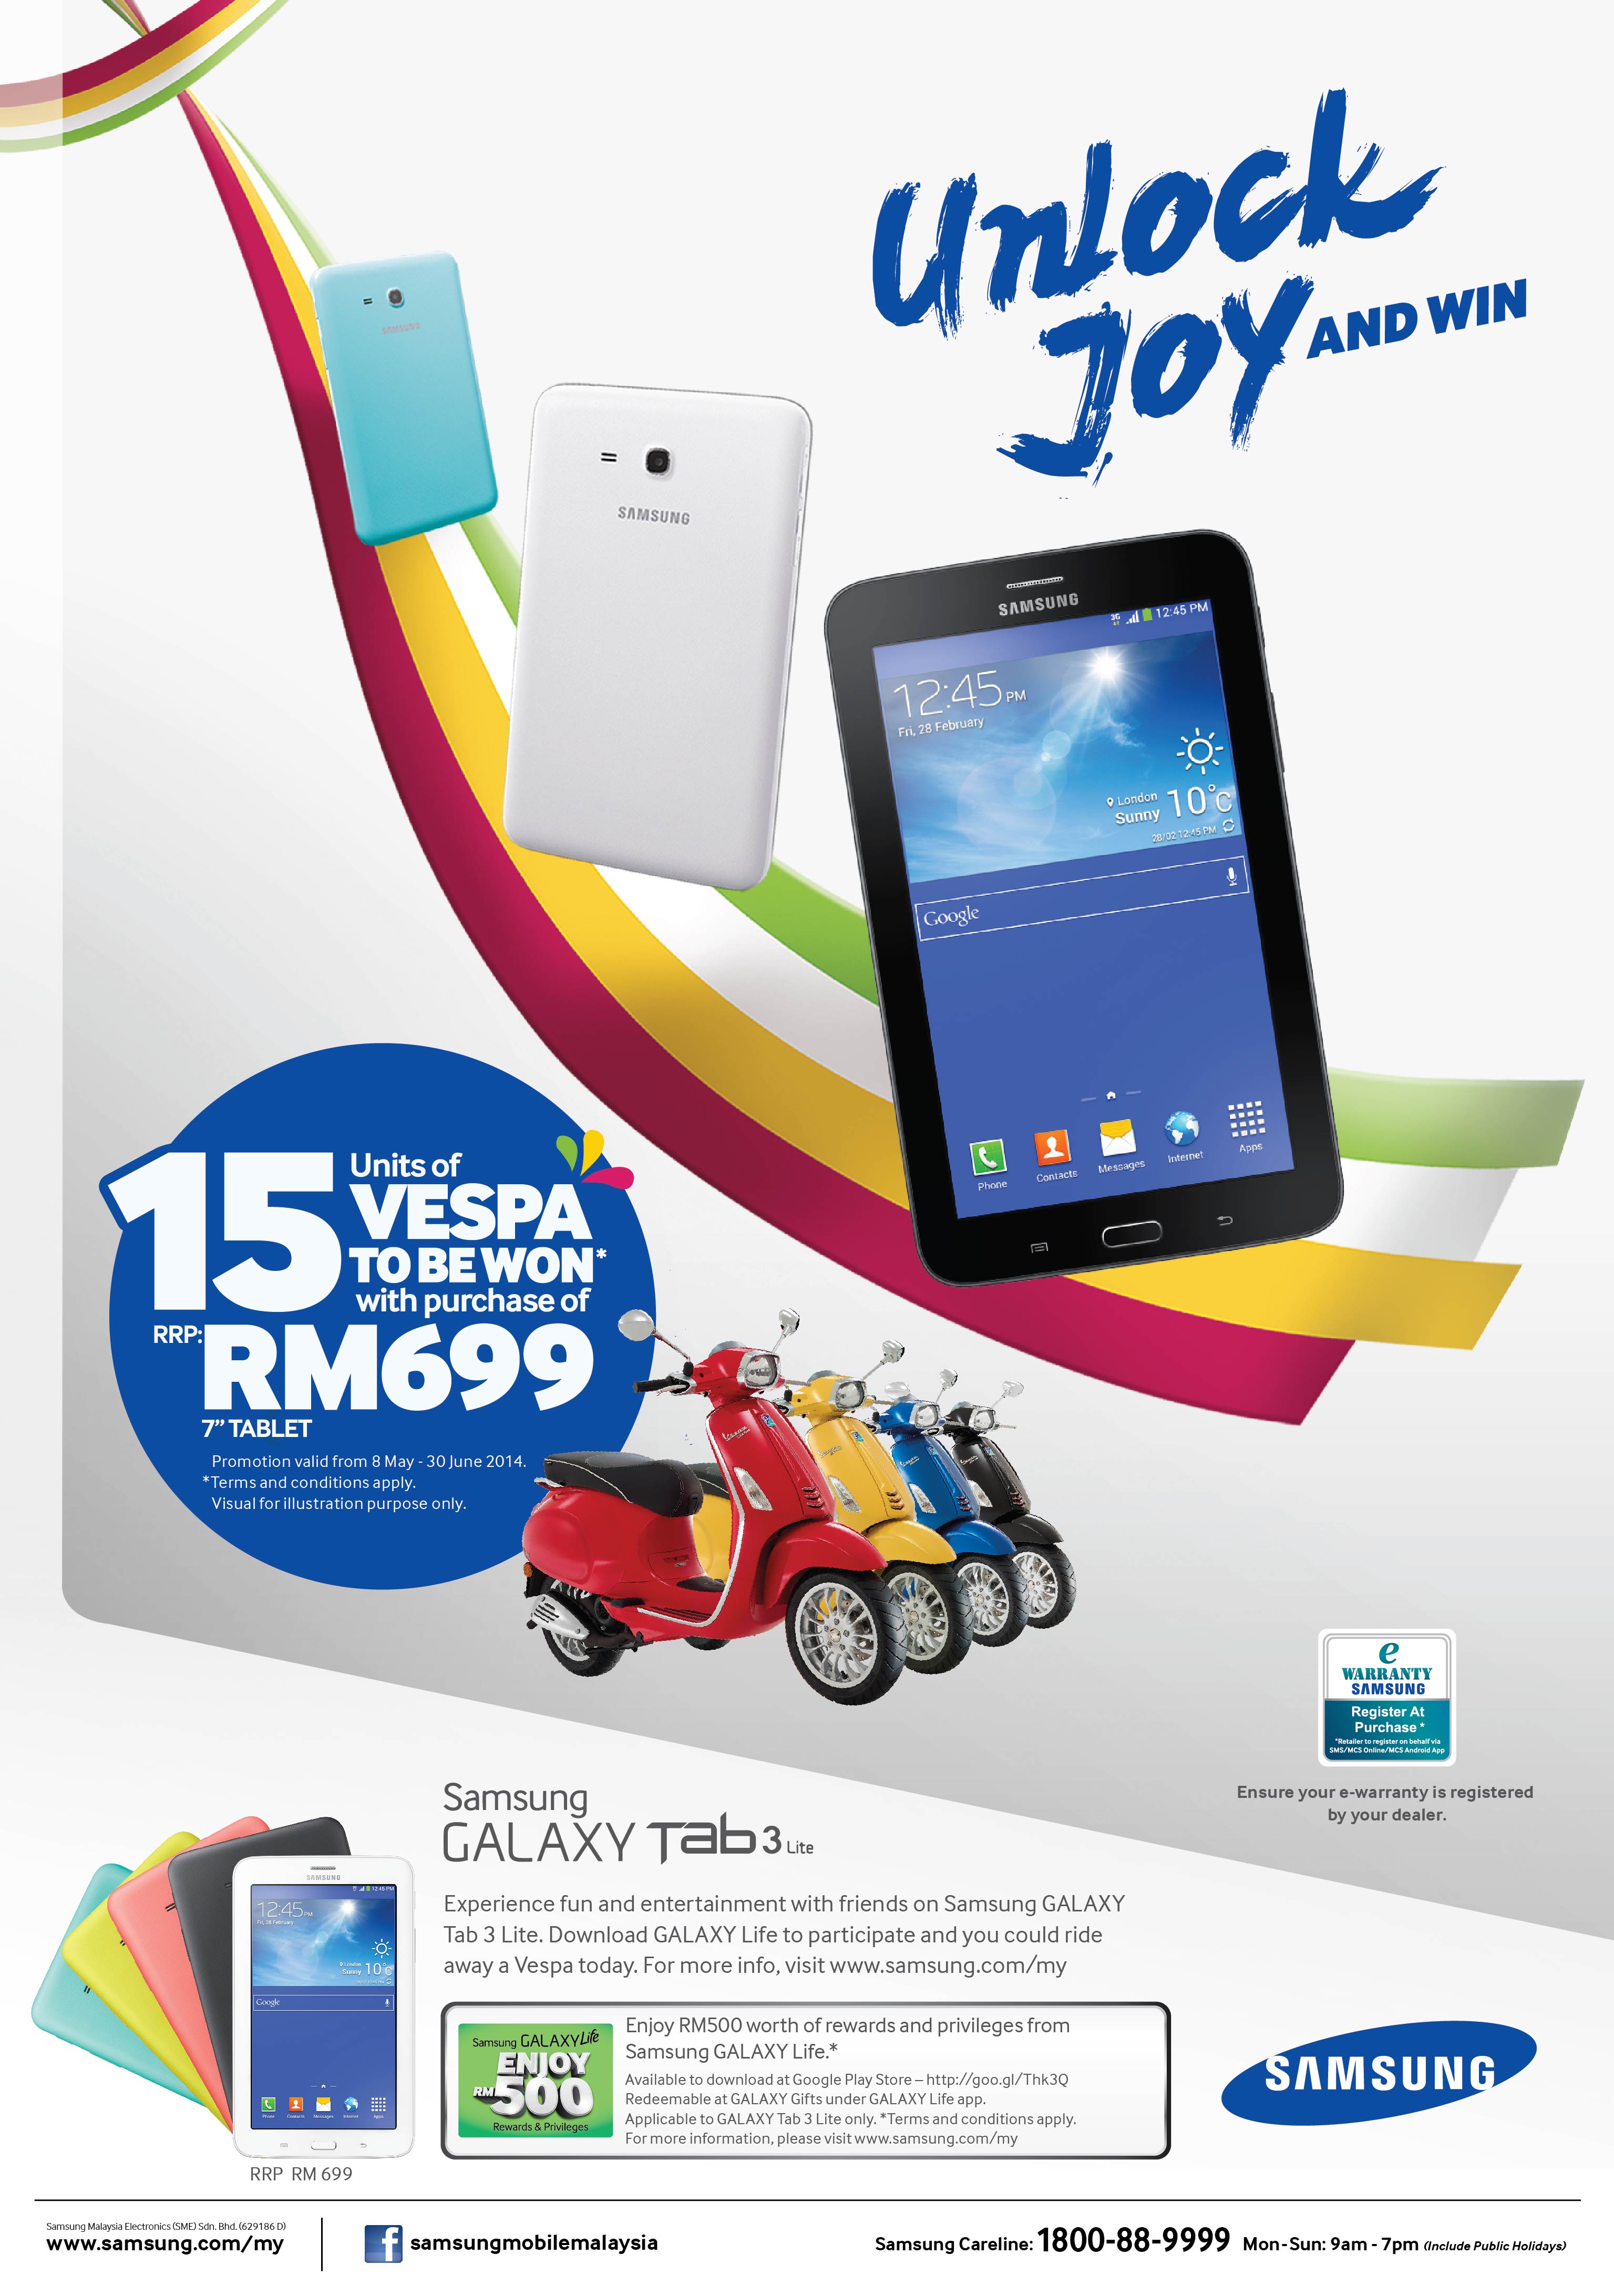 Buy A Samsung Galaxy Tab 3 Lite And Stand A Chance To Win 1 of 15 Vespas | Lowyat.NET3071 x 4370